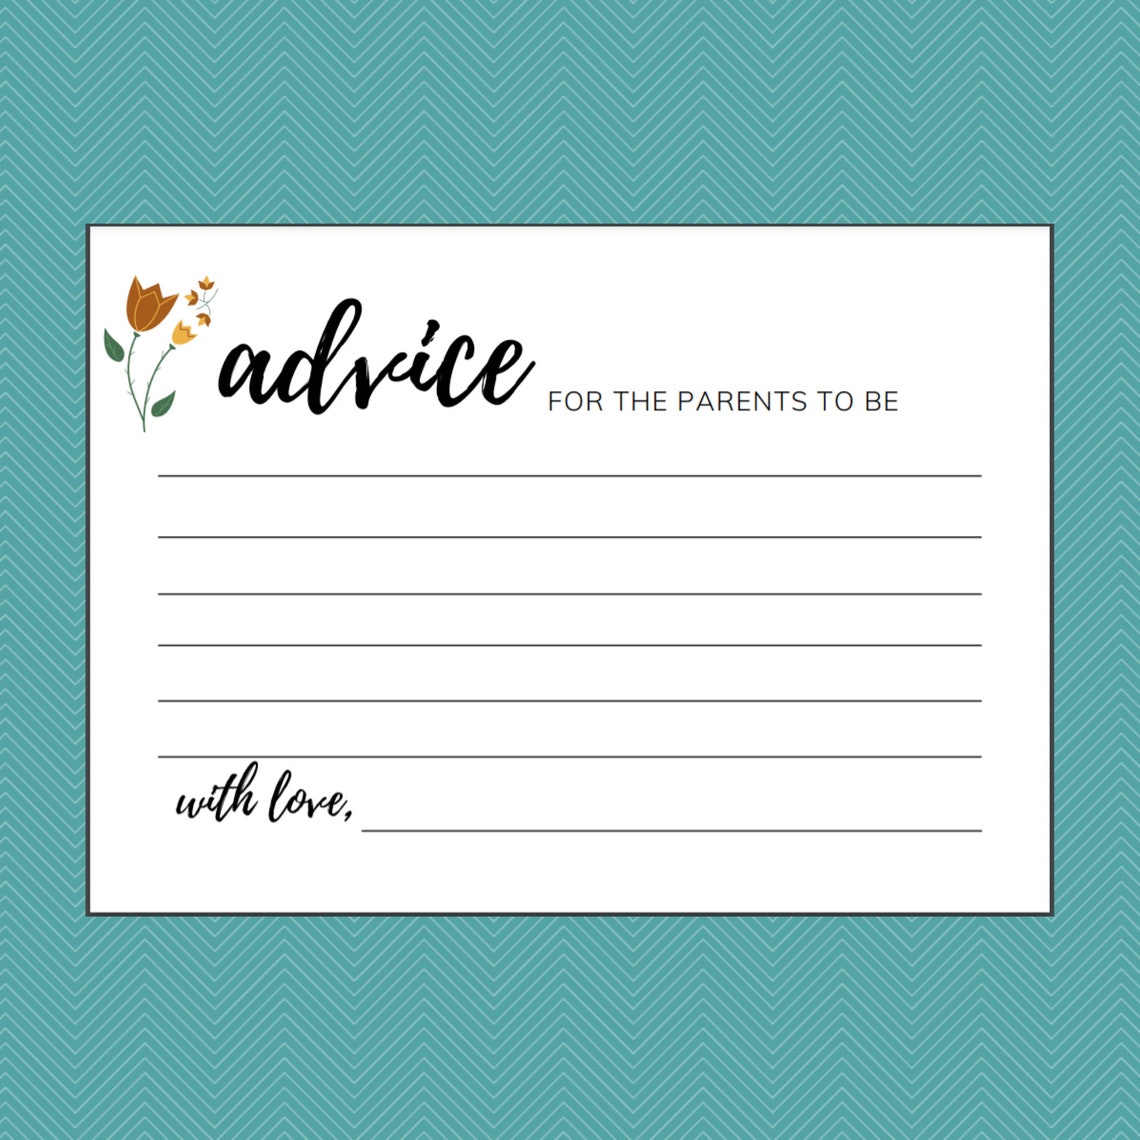 advice-for-parents-to-be-printable-advice-for-parents-card-etsy